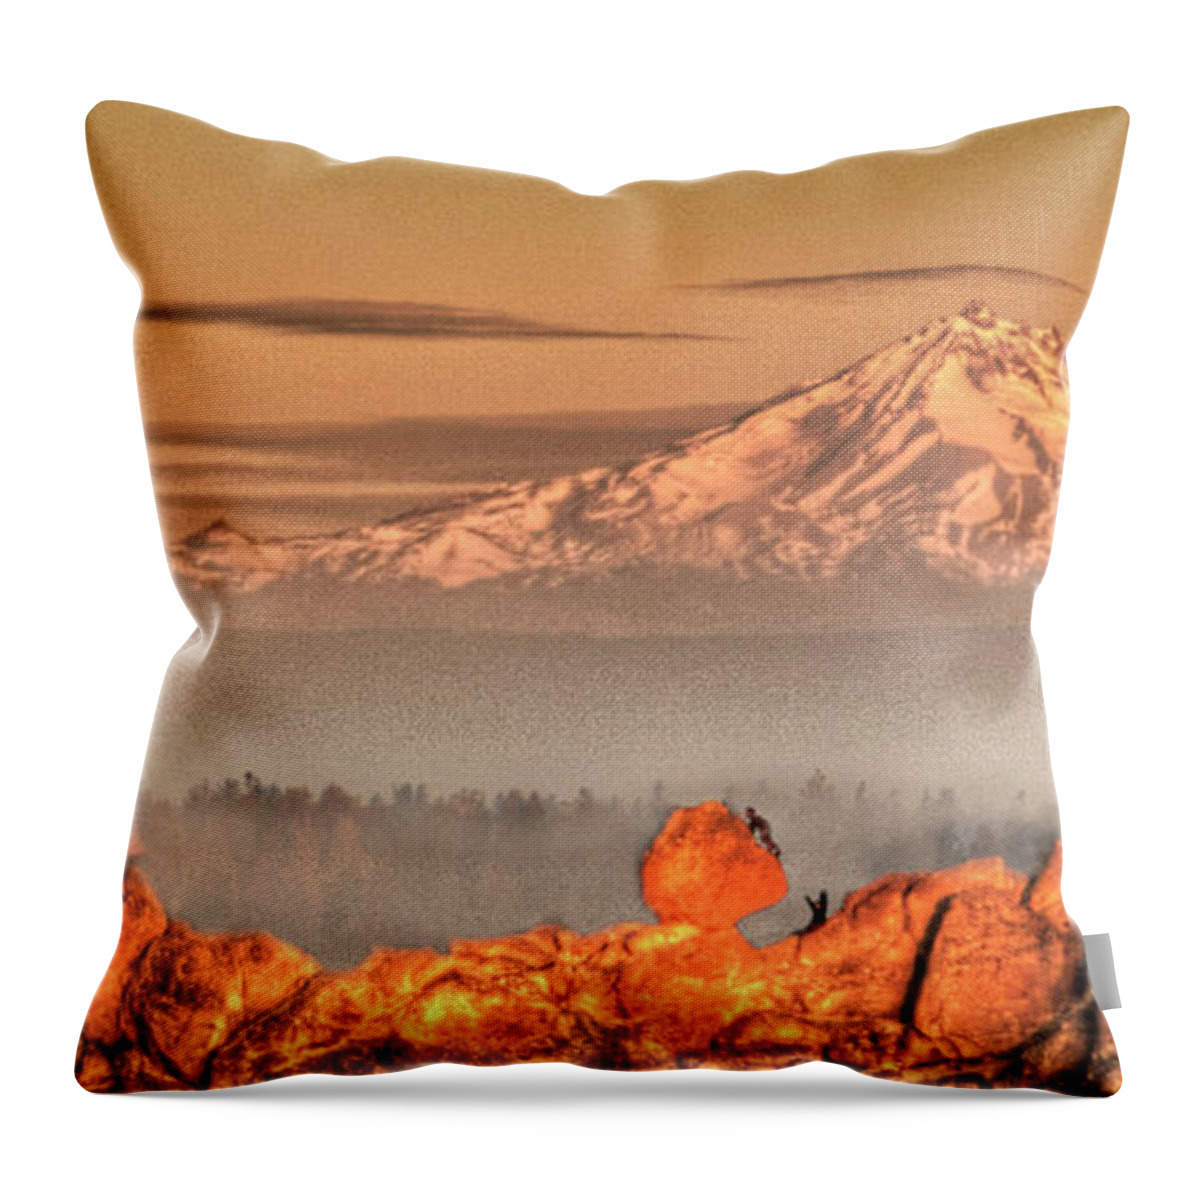 Tranquility Throw Pillow featuring the photograph Smith Rock, Oregon #1 by Image By Nonac digi For The Green Man